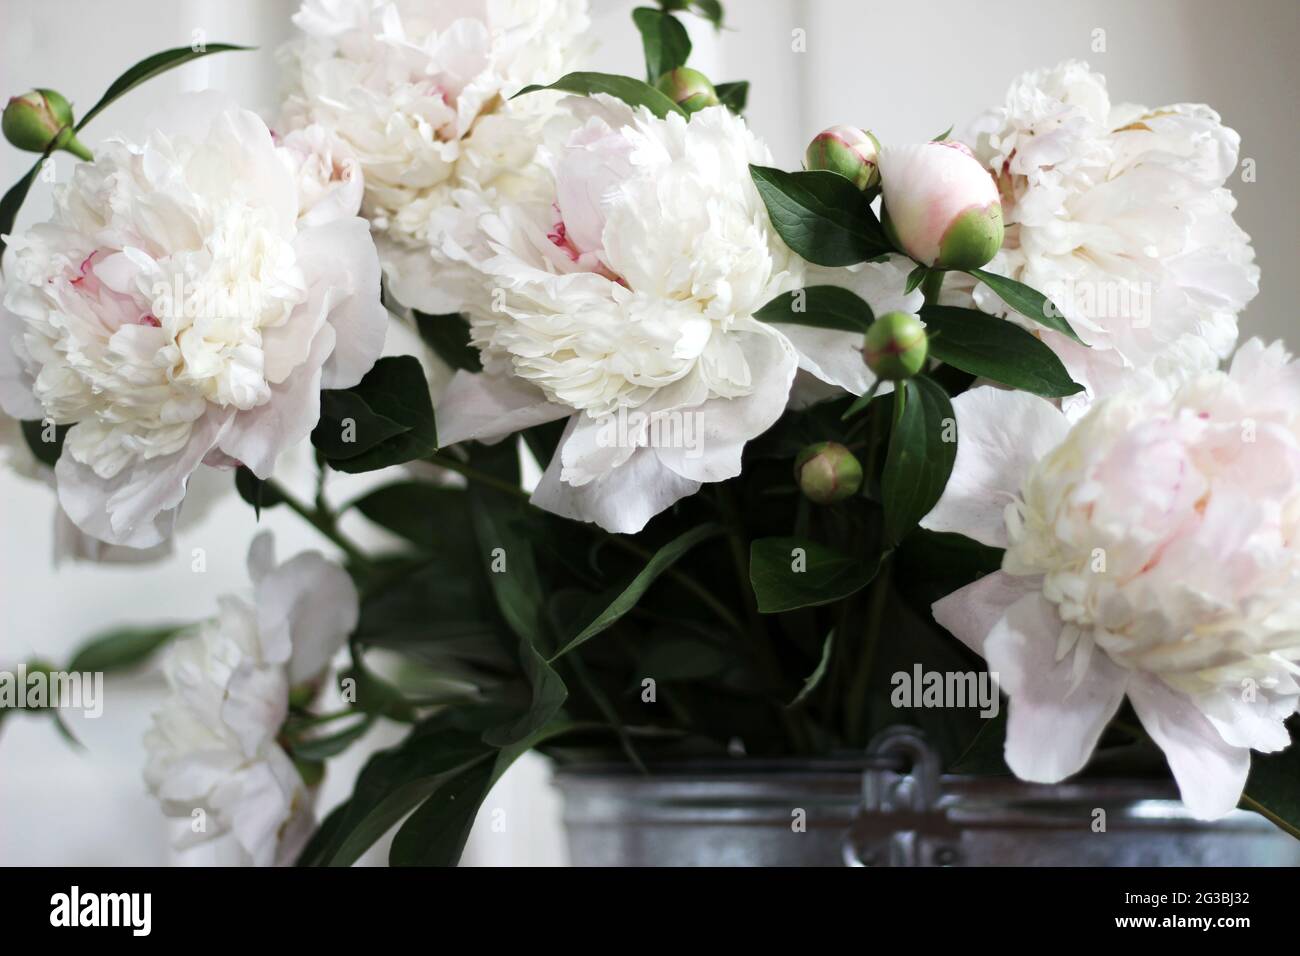 Bouquet of White and Pale Pink Peonies. Creamy Peonies in the Minimal White Interior Design. Interior Decoration. Stock Photo